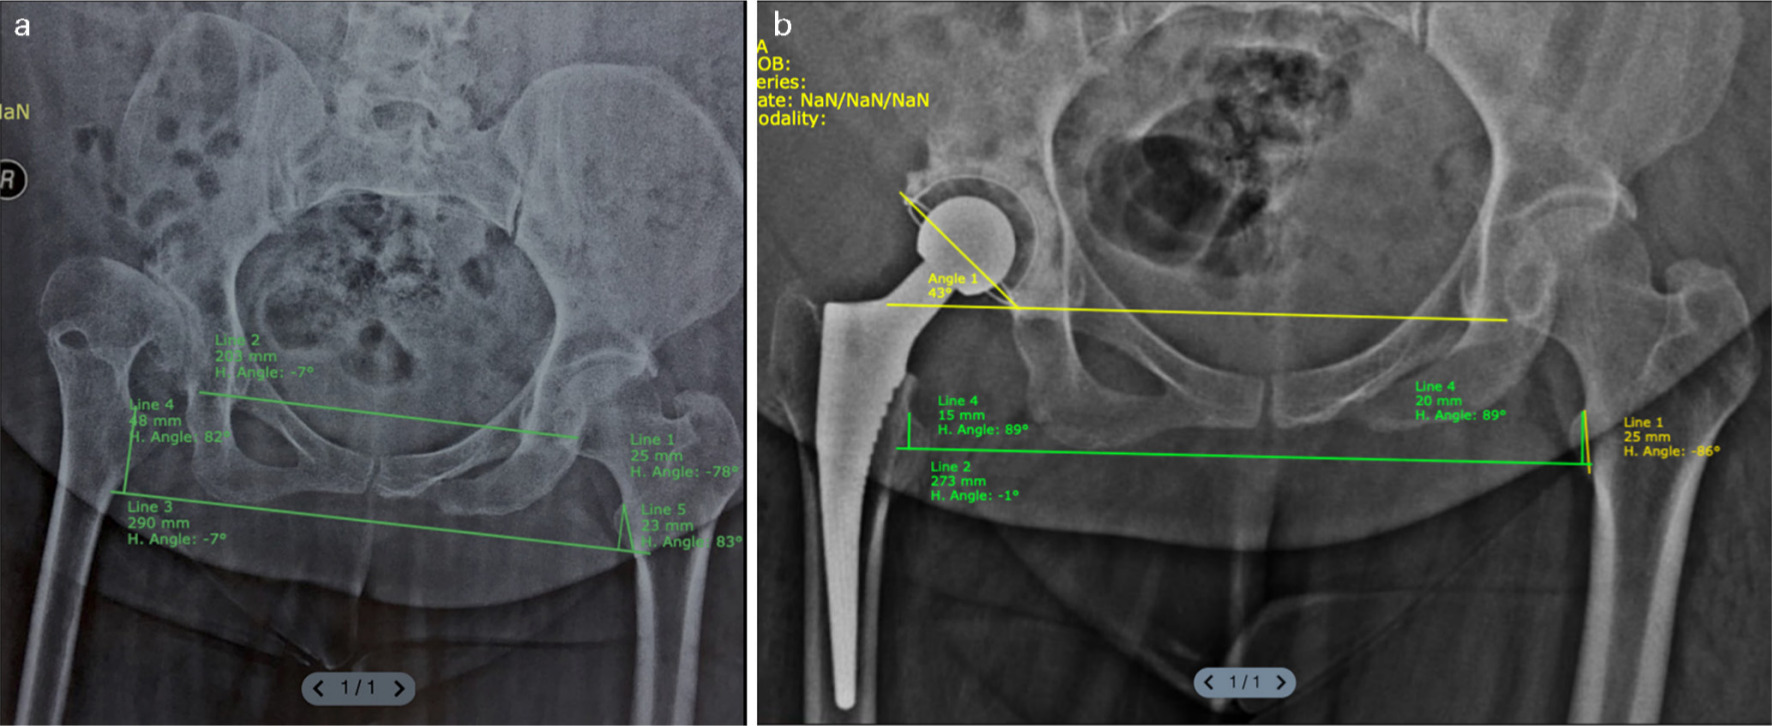 Fig. 8 
            a) Preoperative radiograph showing hip arthritis with subluxation in a paralytic right lower limb due to polio; b) Six years follow-up following right total hip arthroplasty. Note the stable hip prosthesis is situ.
          